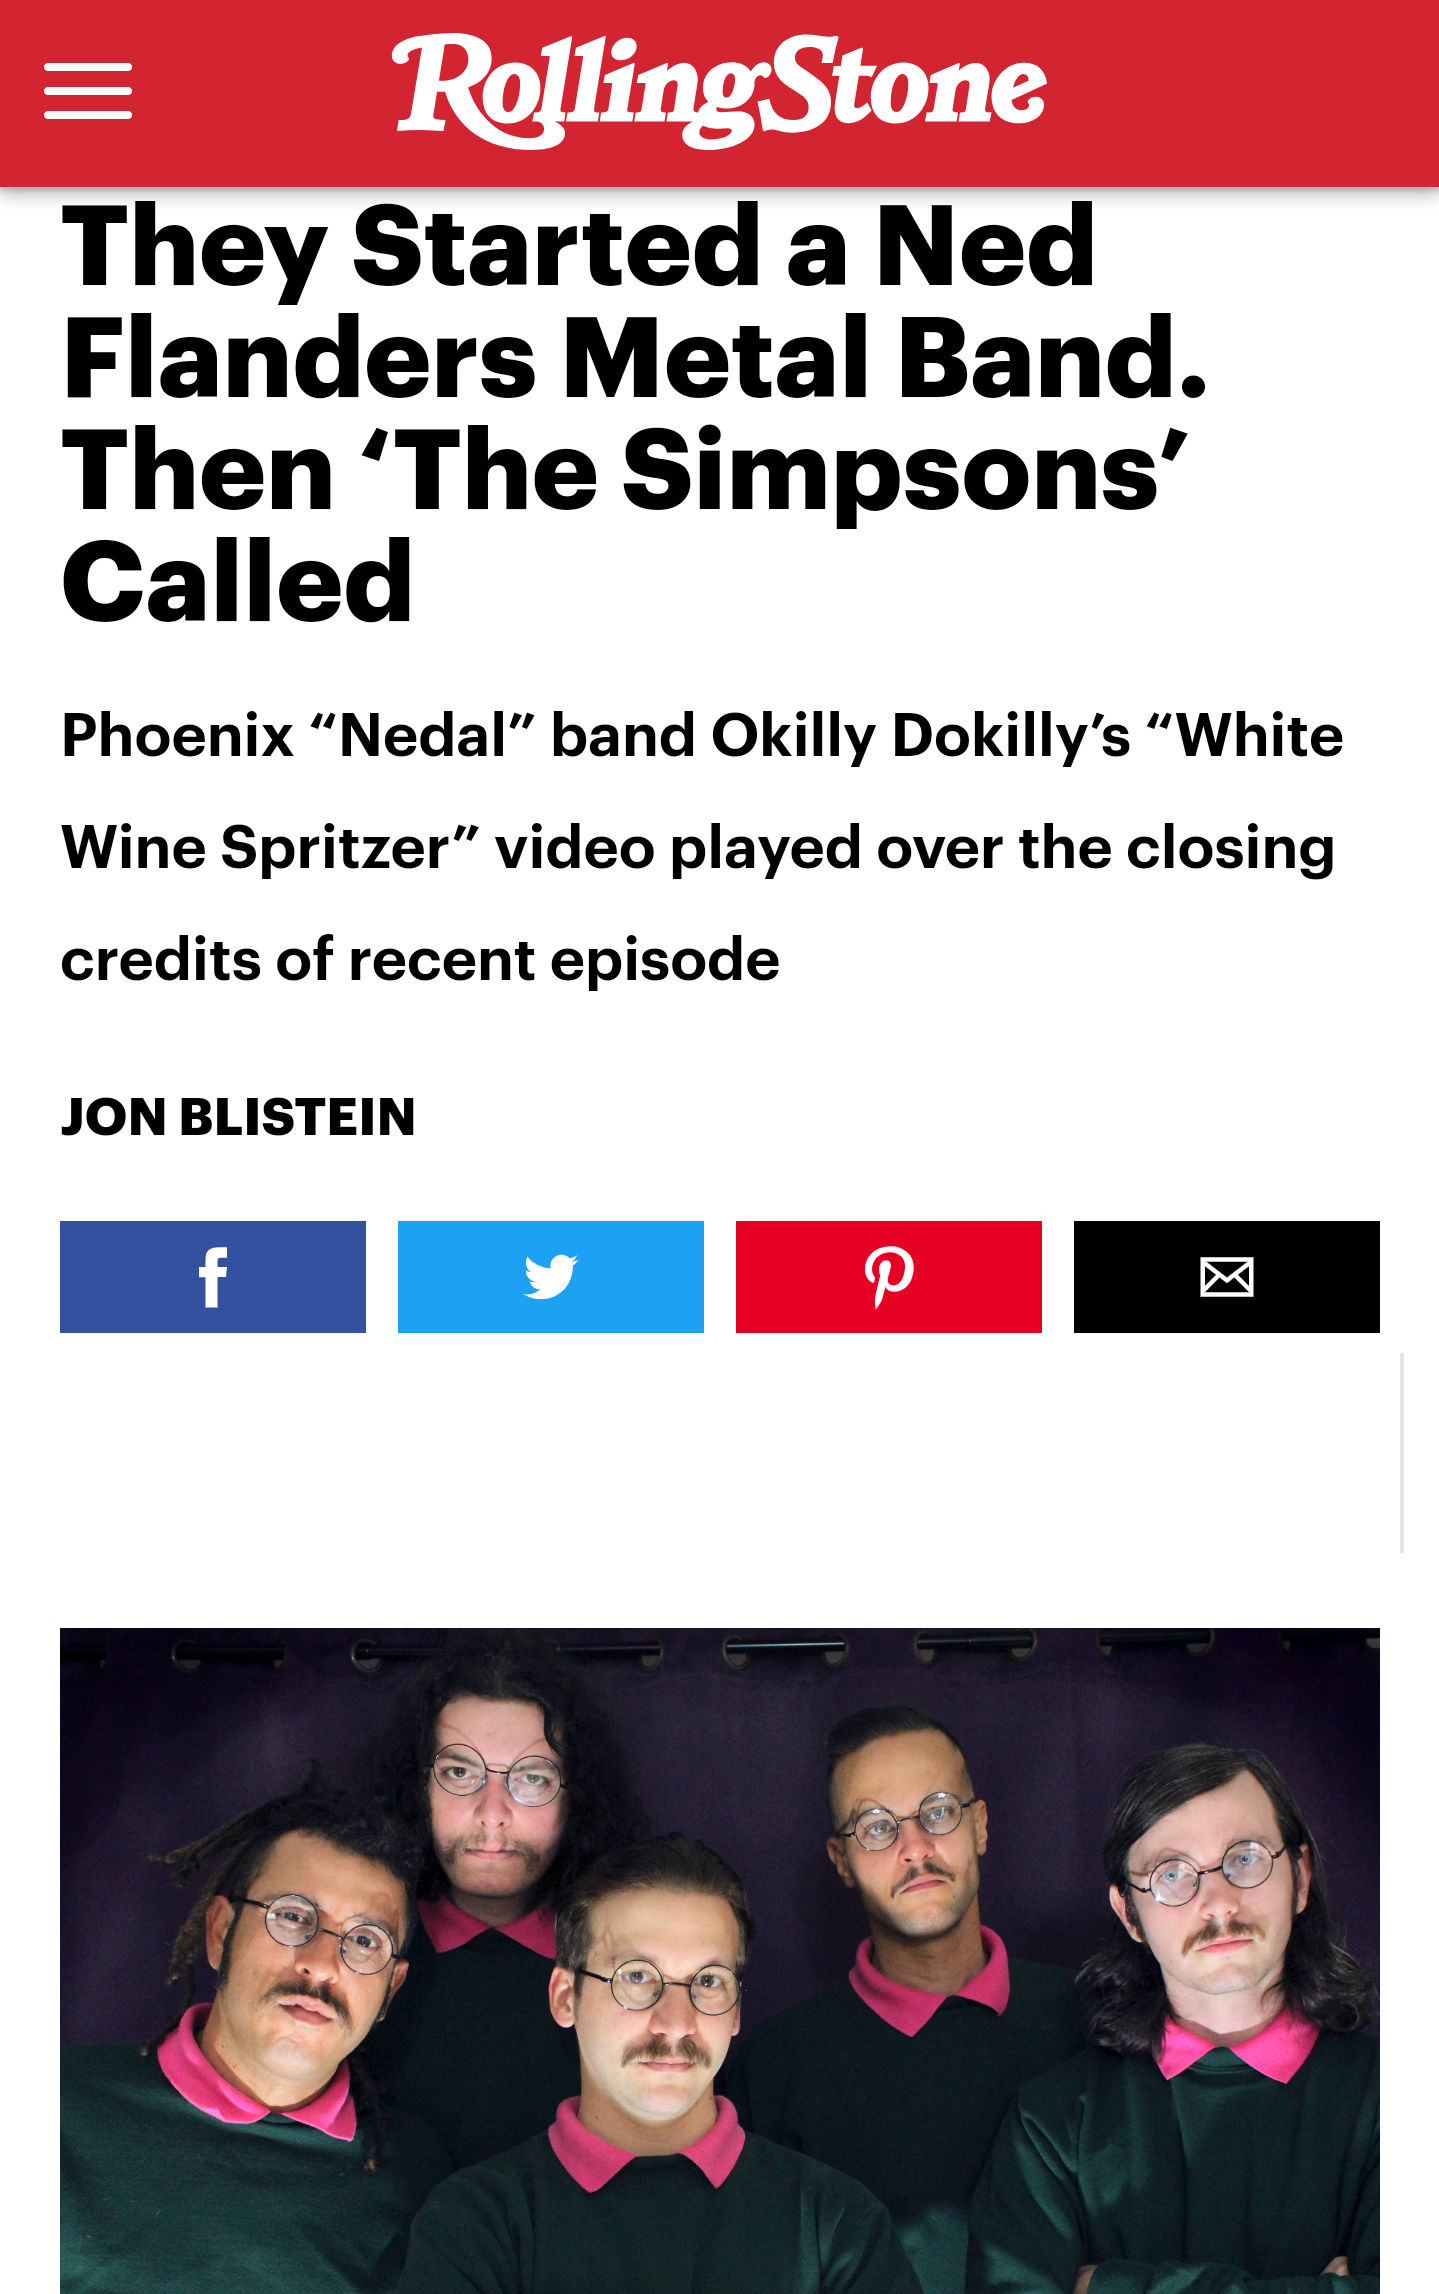 smile - Rolling Stone They Started a Ned Flanders Metal Band. Then 'The Simpsons' Called Phoenix "Nedal" band Okilly Dokilly's "White Wine Spritzer" video played over the closing credits of recent episode Jon Blistein